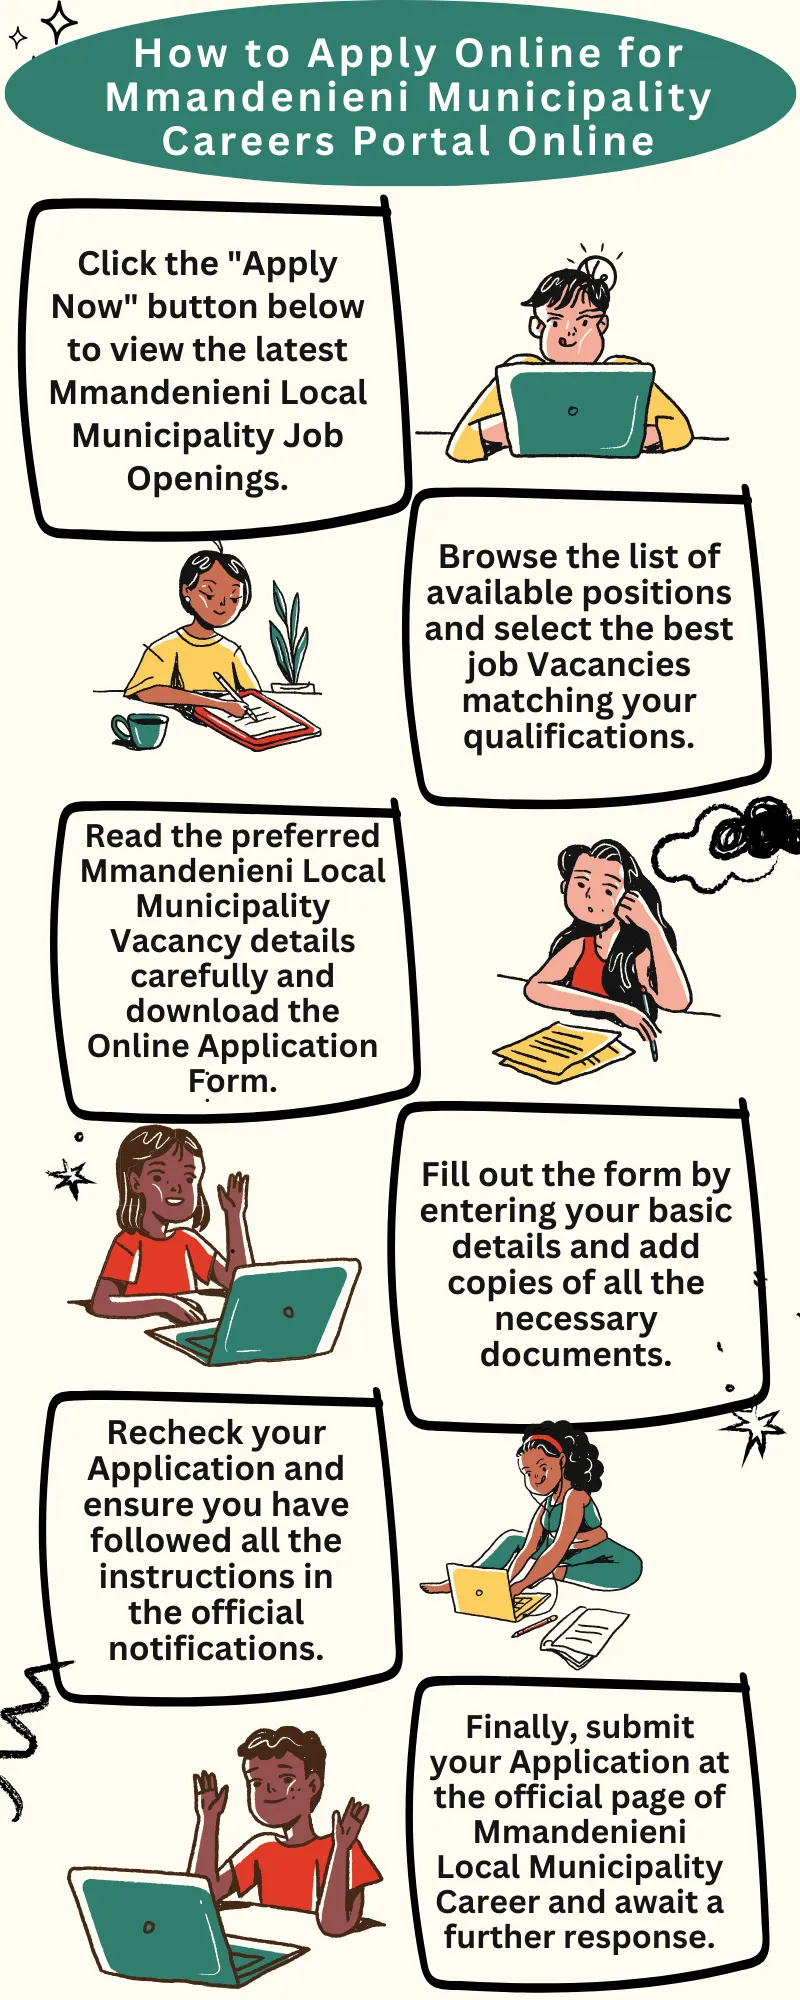 How to Apply Online for Mmandenieni Municipality Careers Portal Online